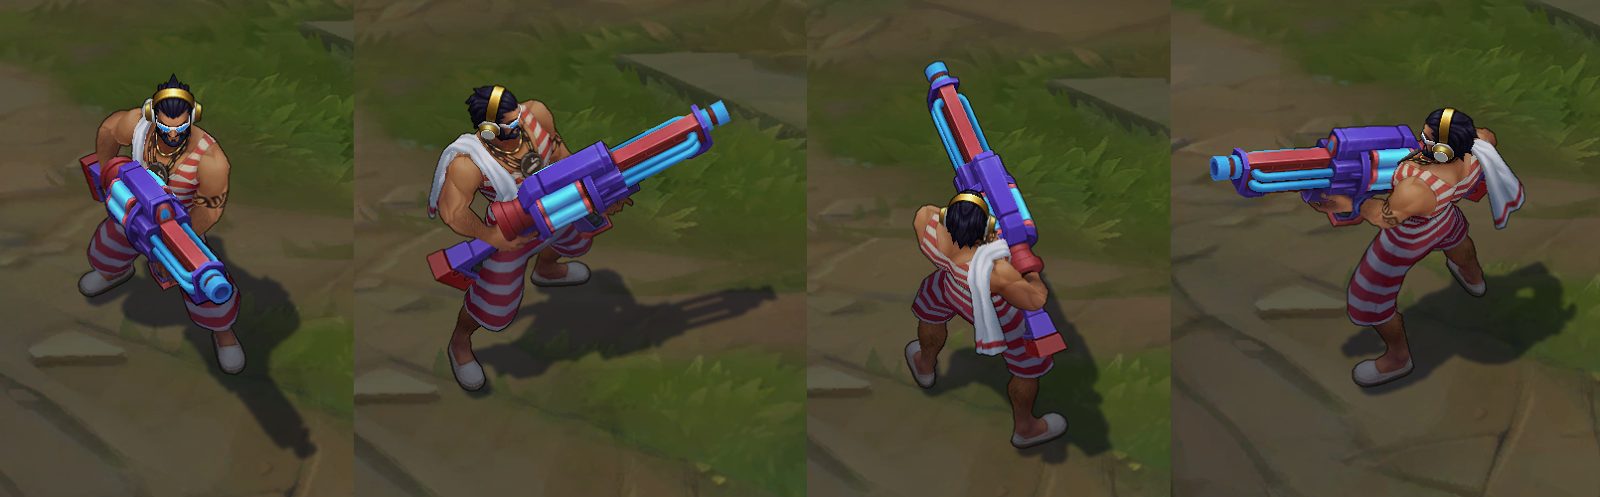 Pool Party Graves chroma skin  pack for league of legends ingame picture